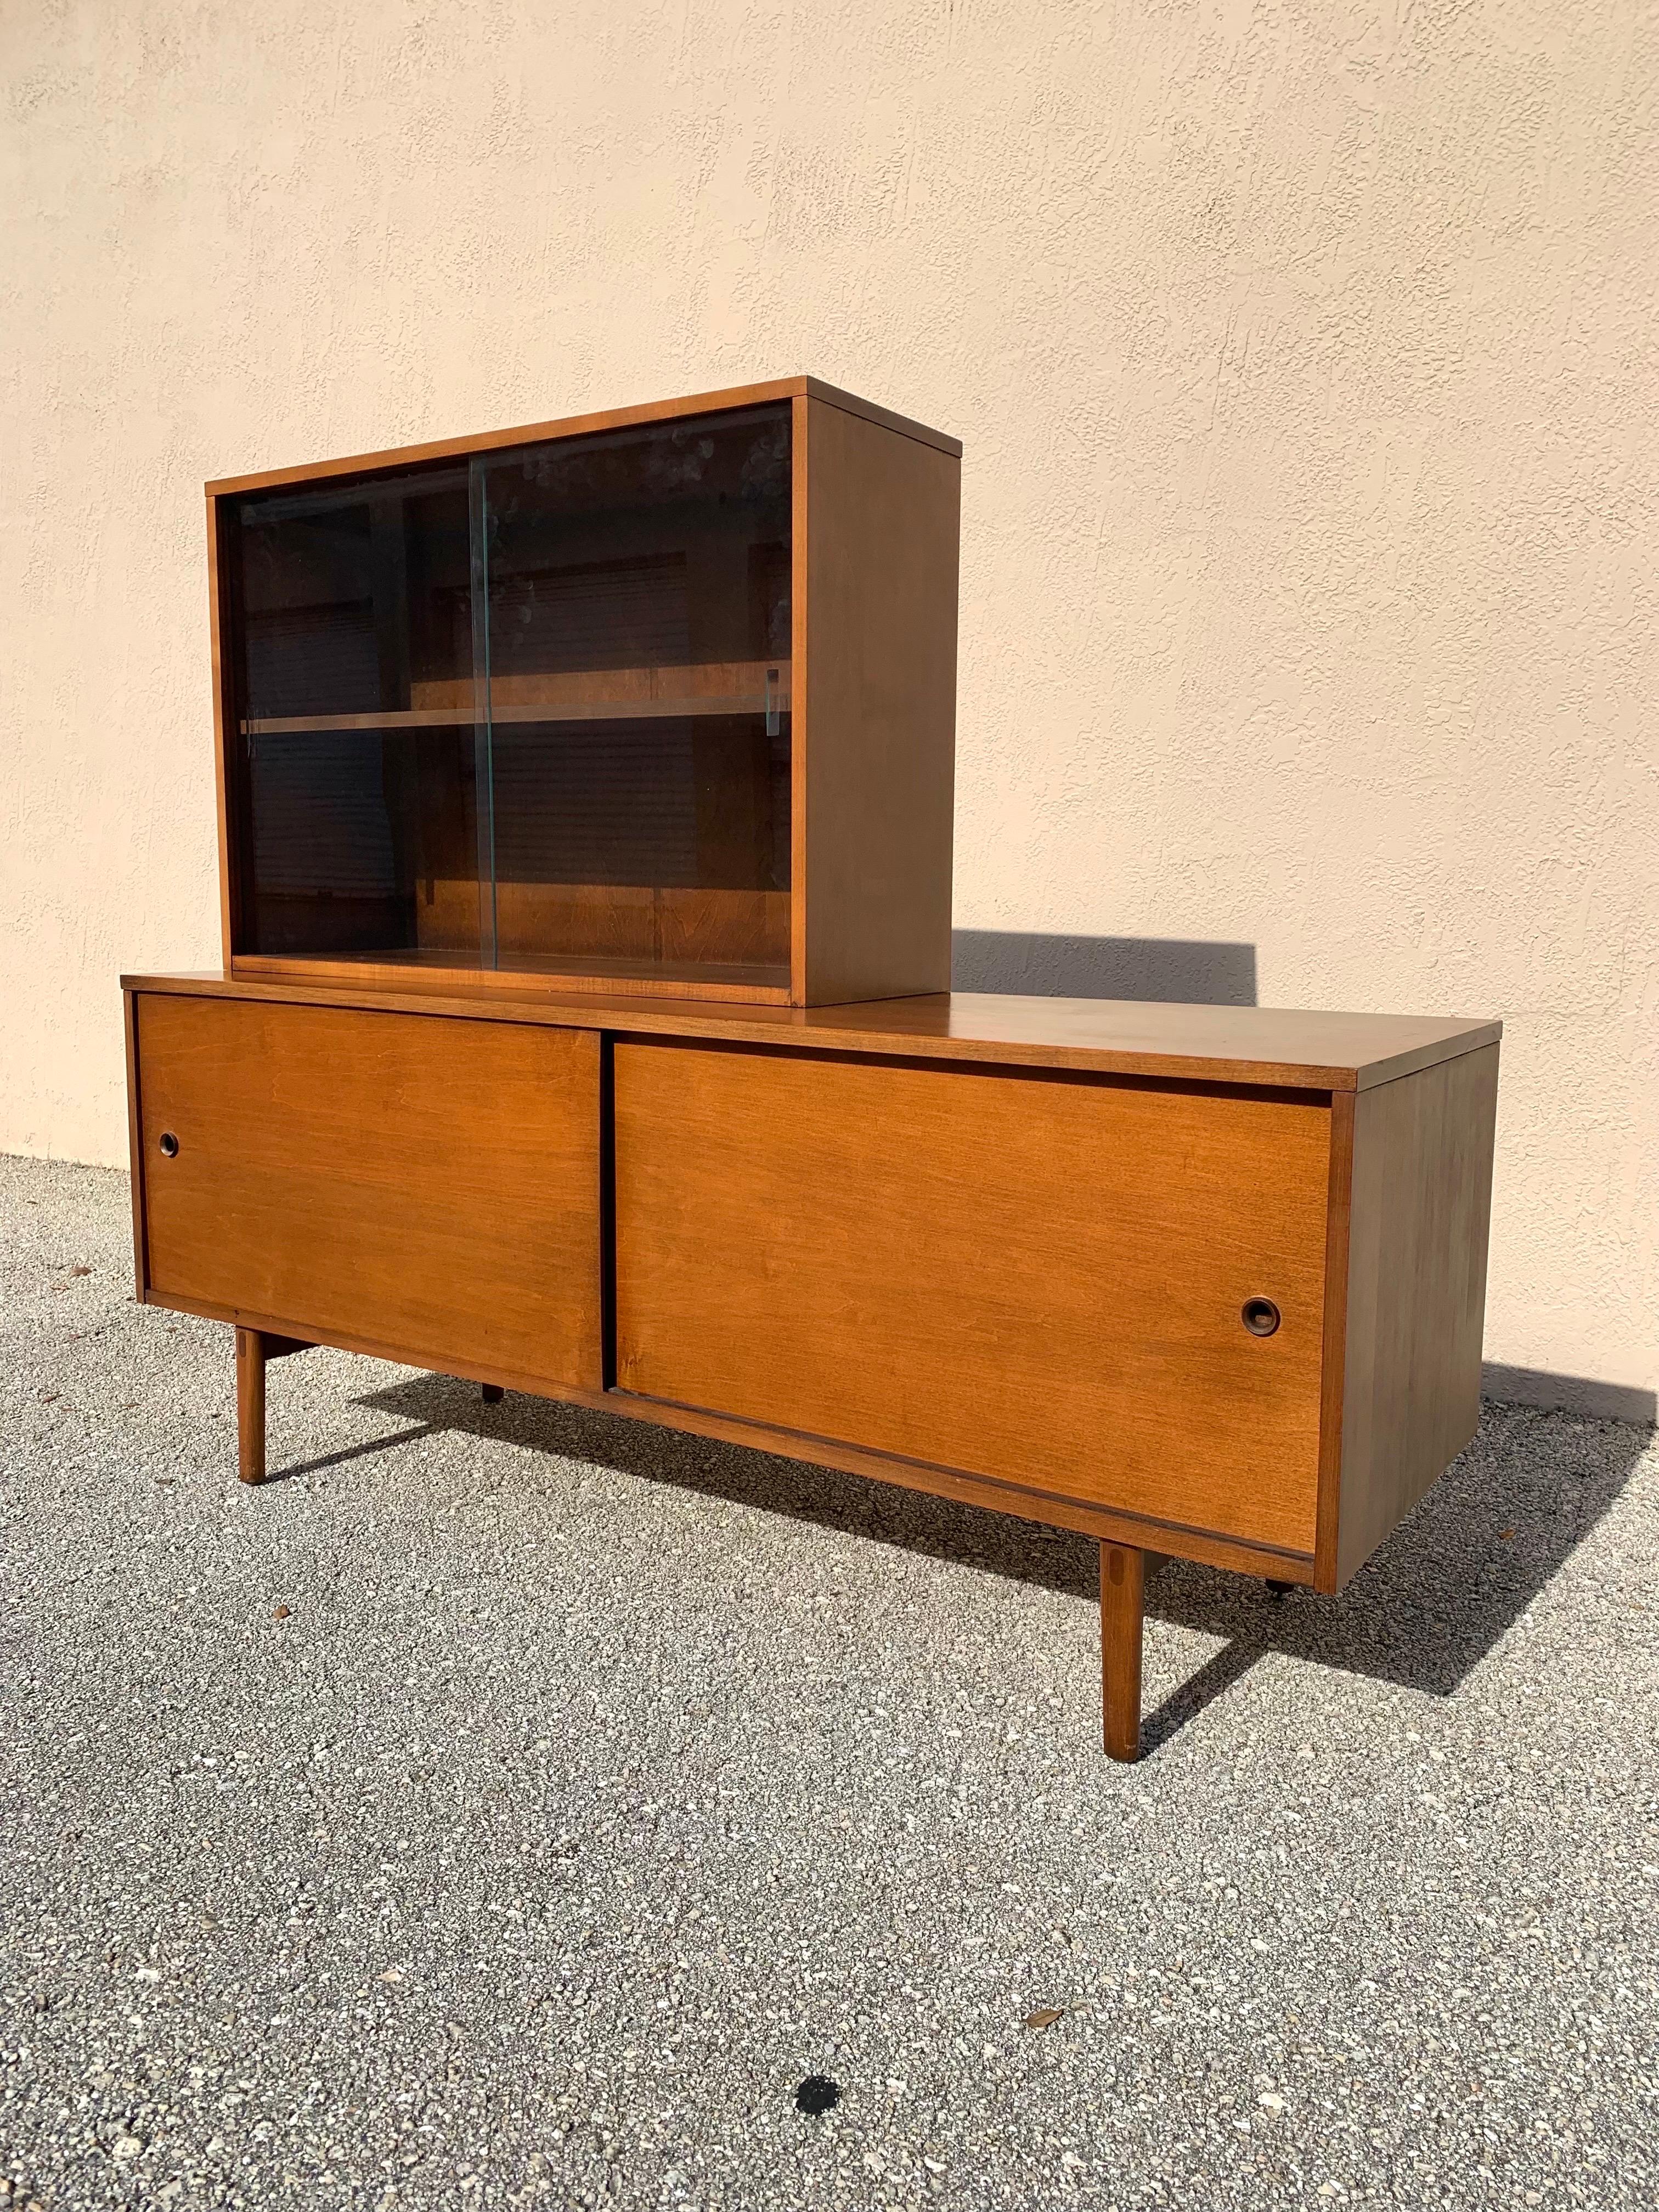 Mid-Century Modern Credenza by Paul McCobb for Planner Group #1513 For Sale 8